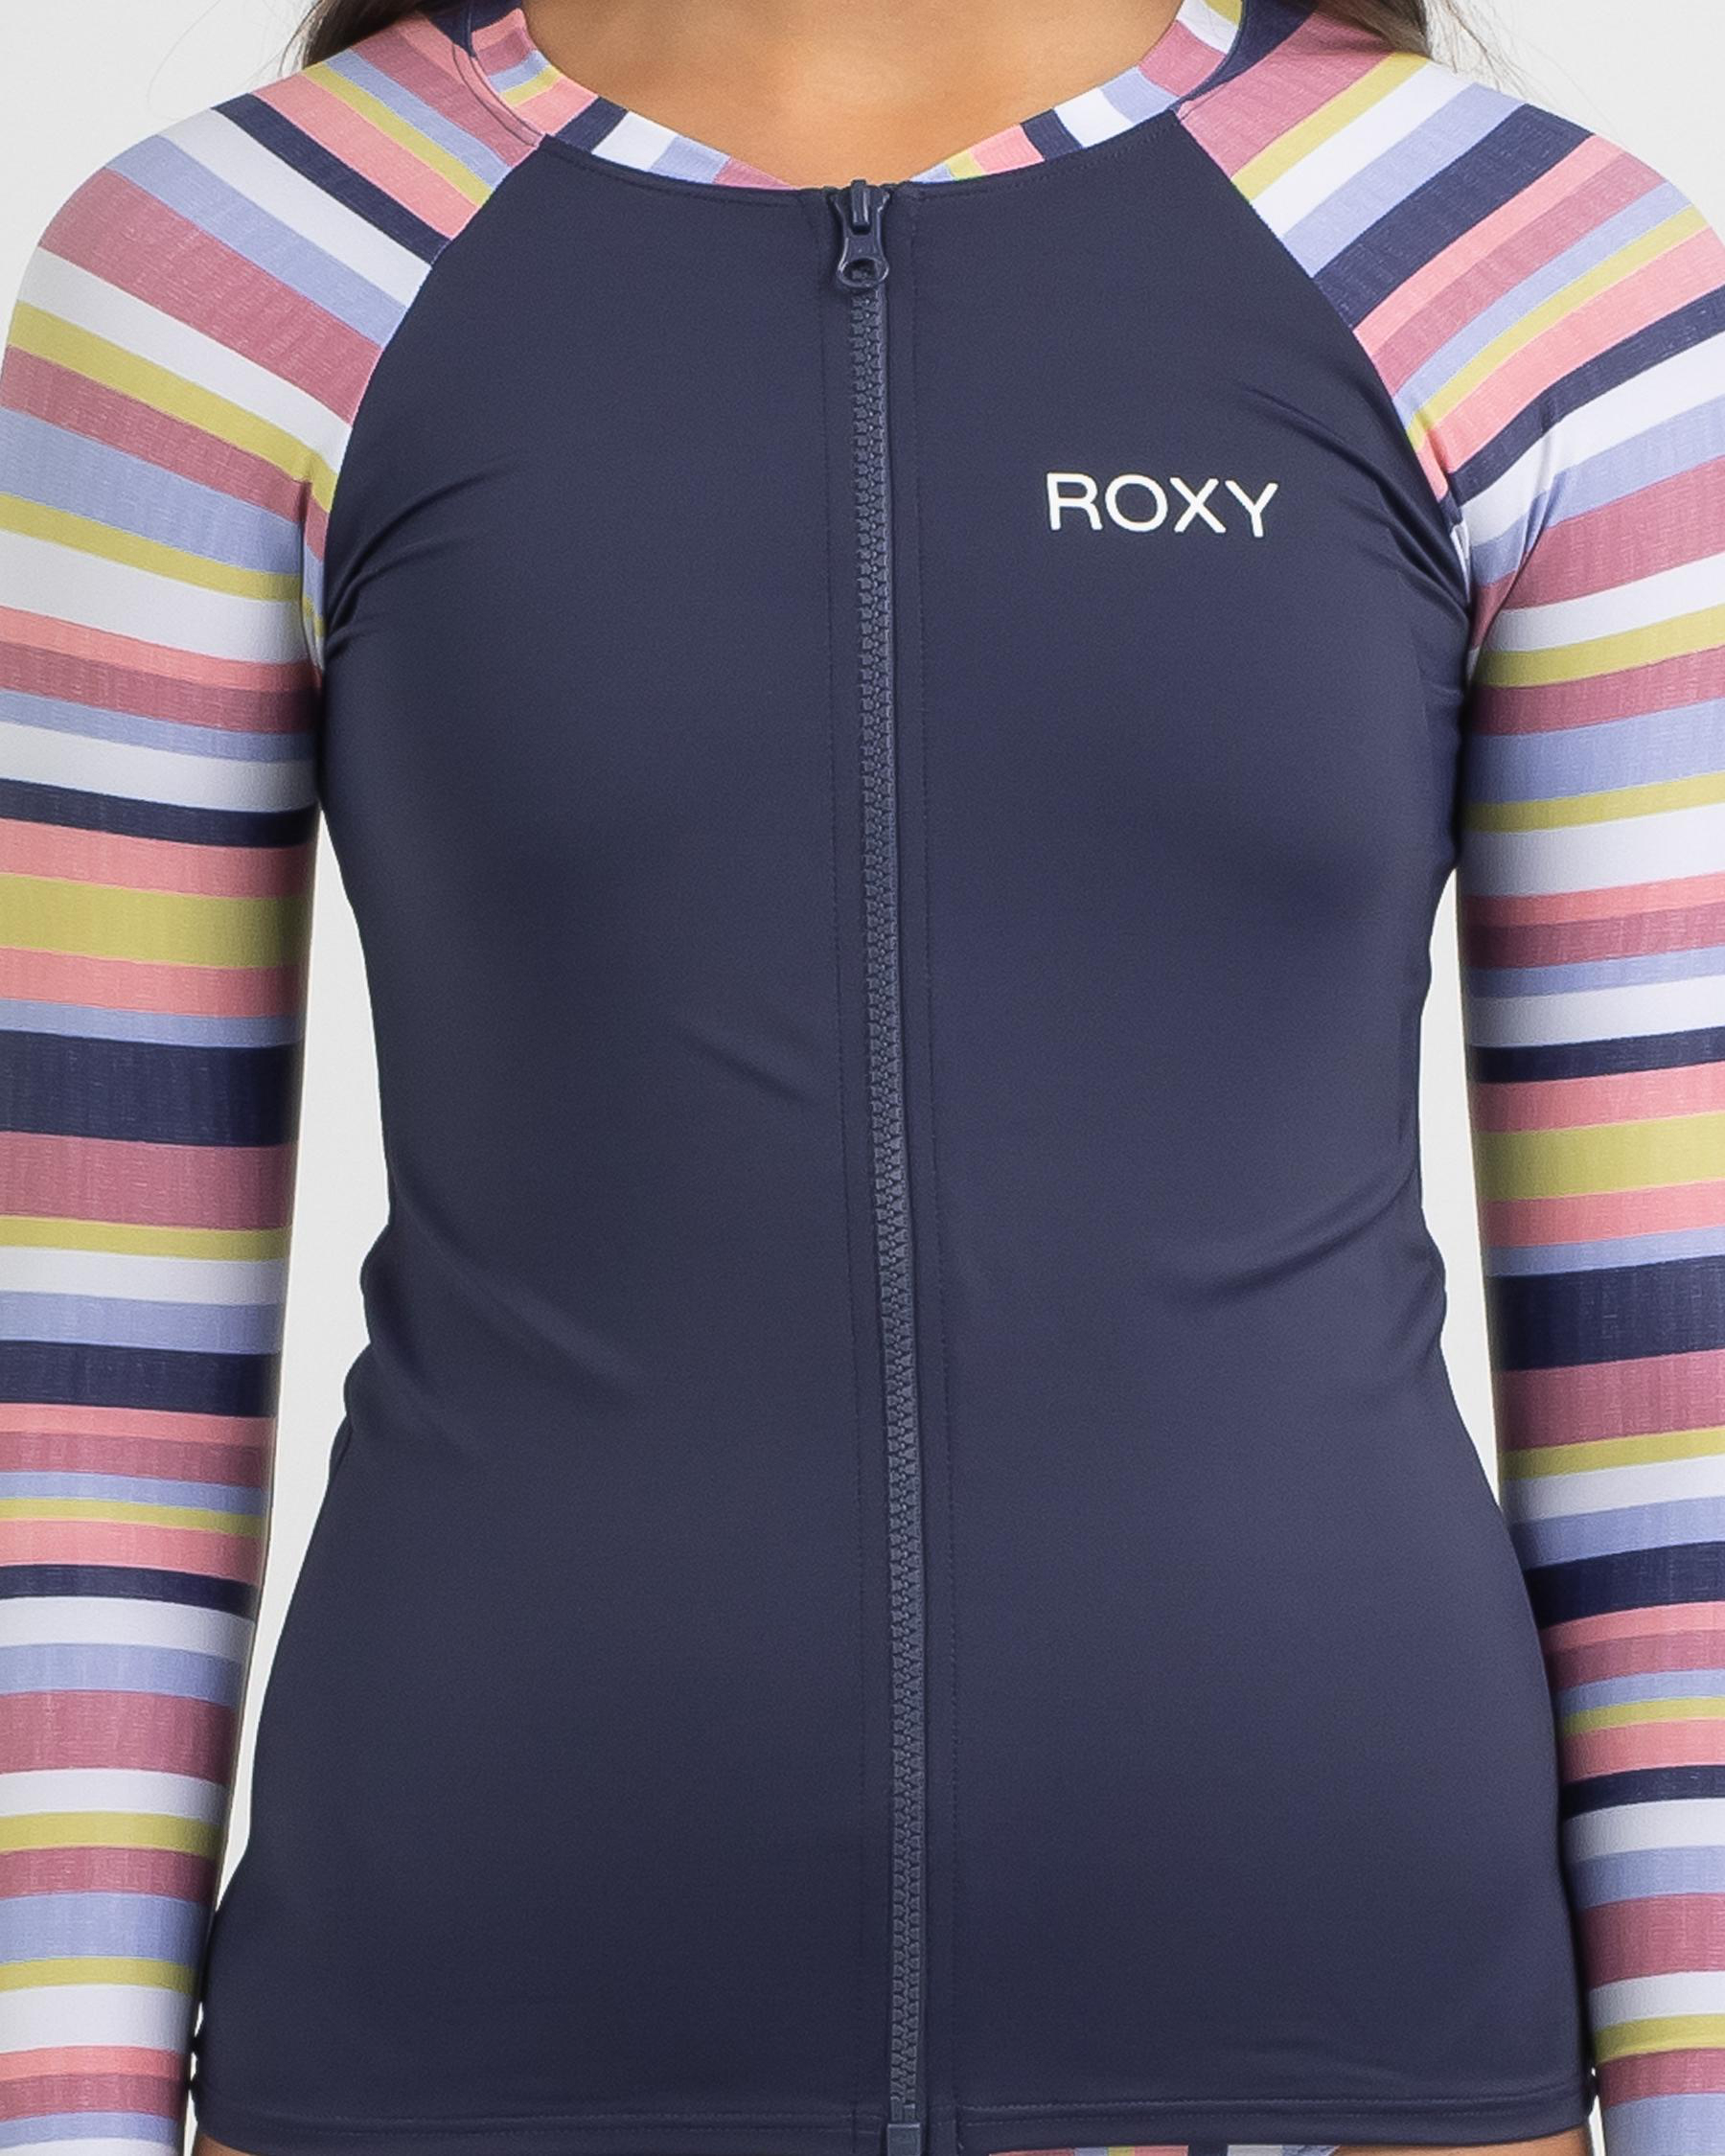 Roxy Girls Lovely Shine Long Sleeve Zip Rash Vest In Heather Rose Fast Shipping And Easy